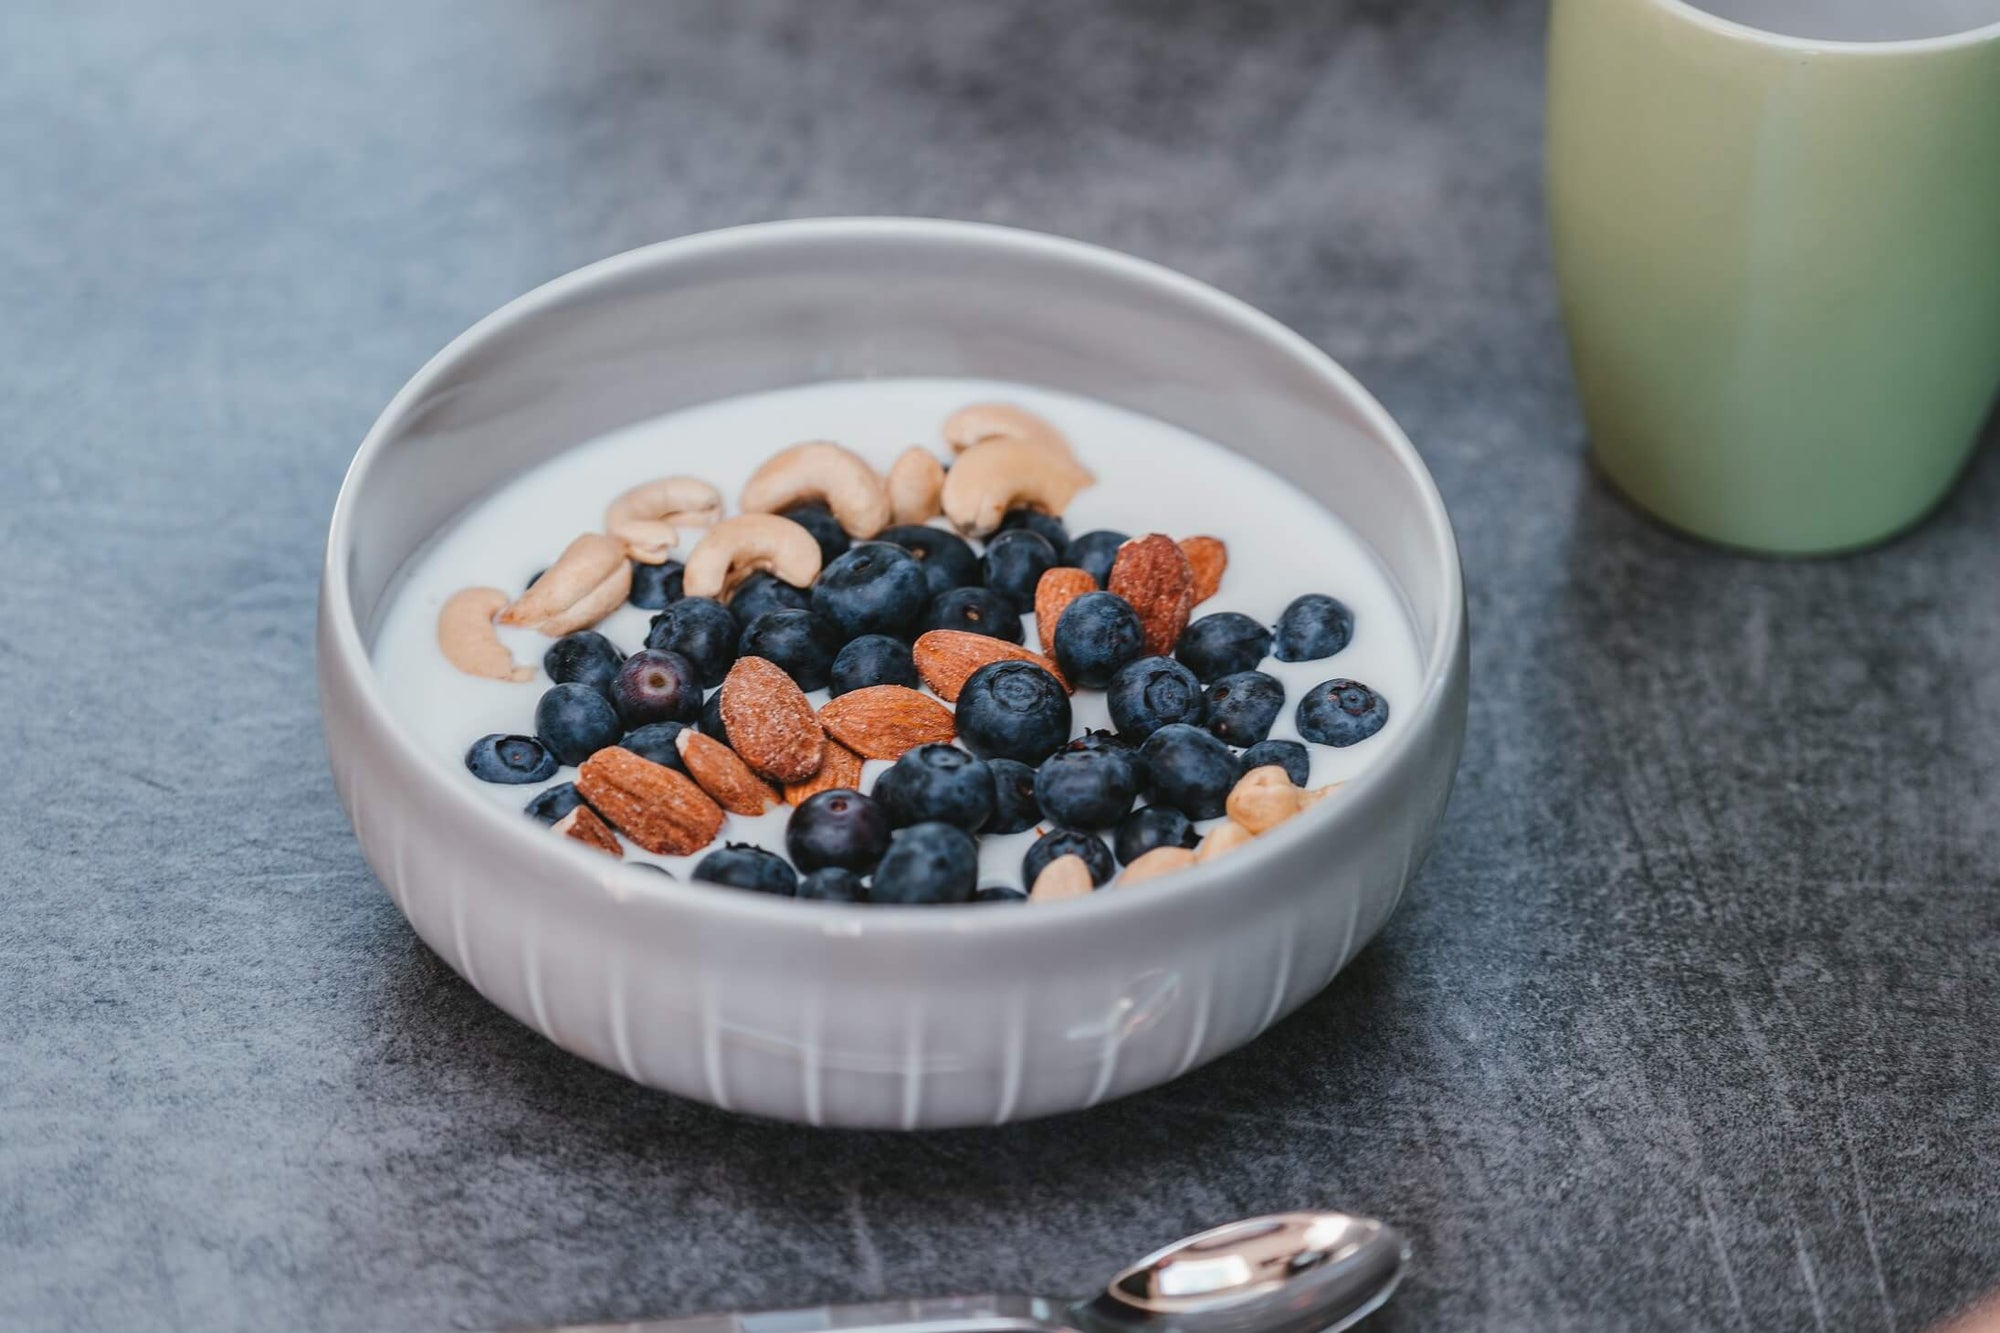 Yogurt in a bowl topped with berries and nuts